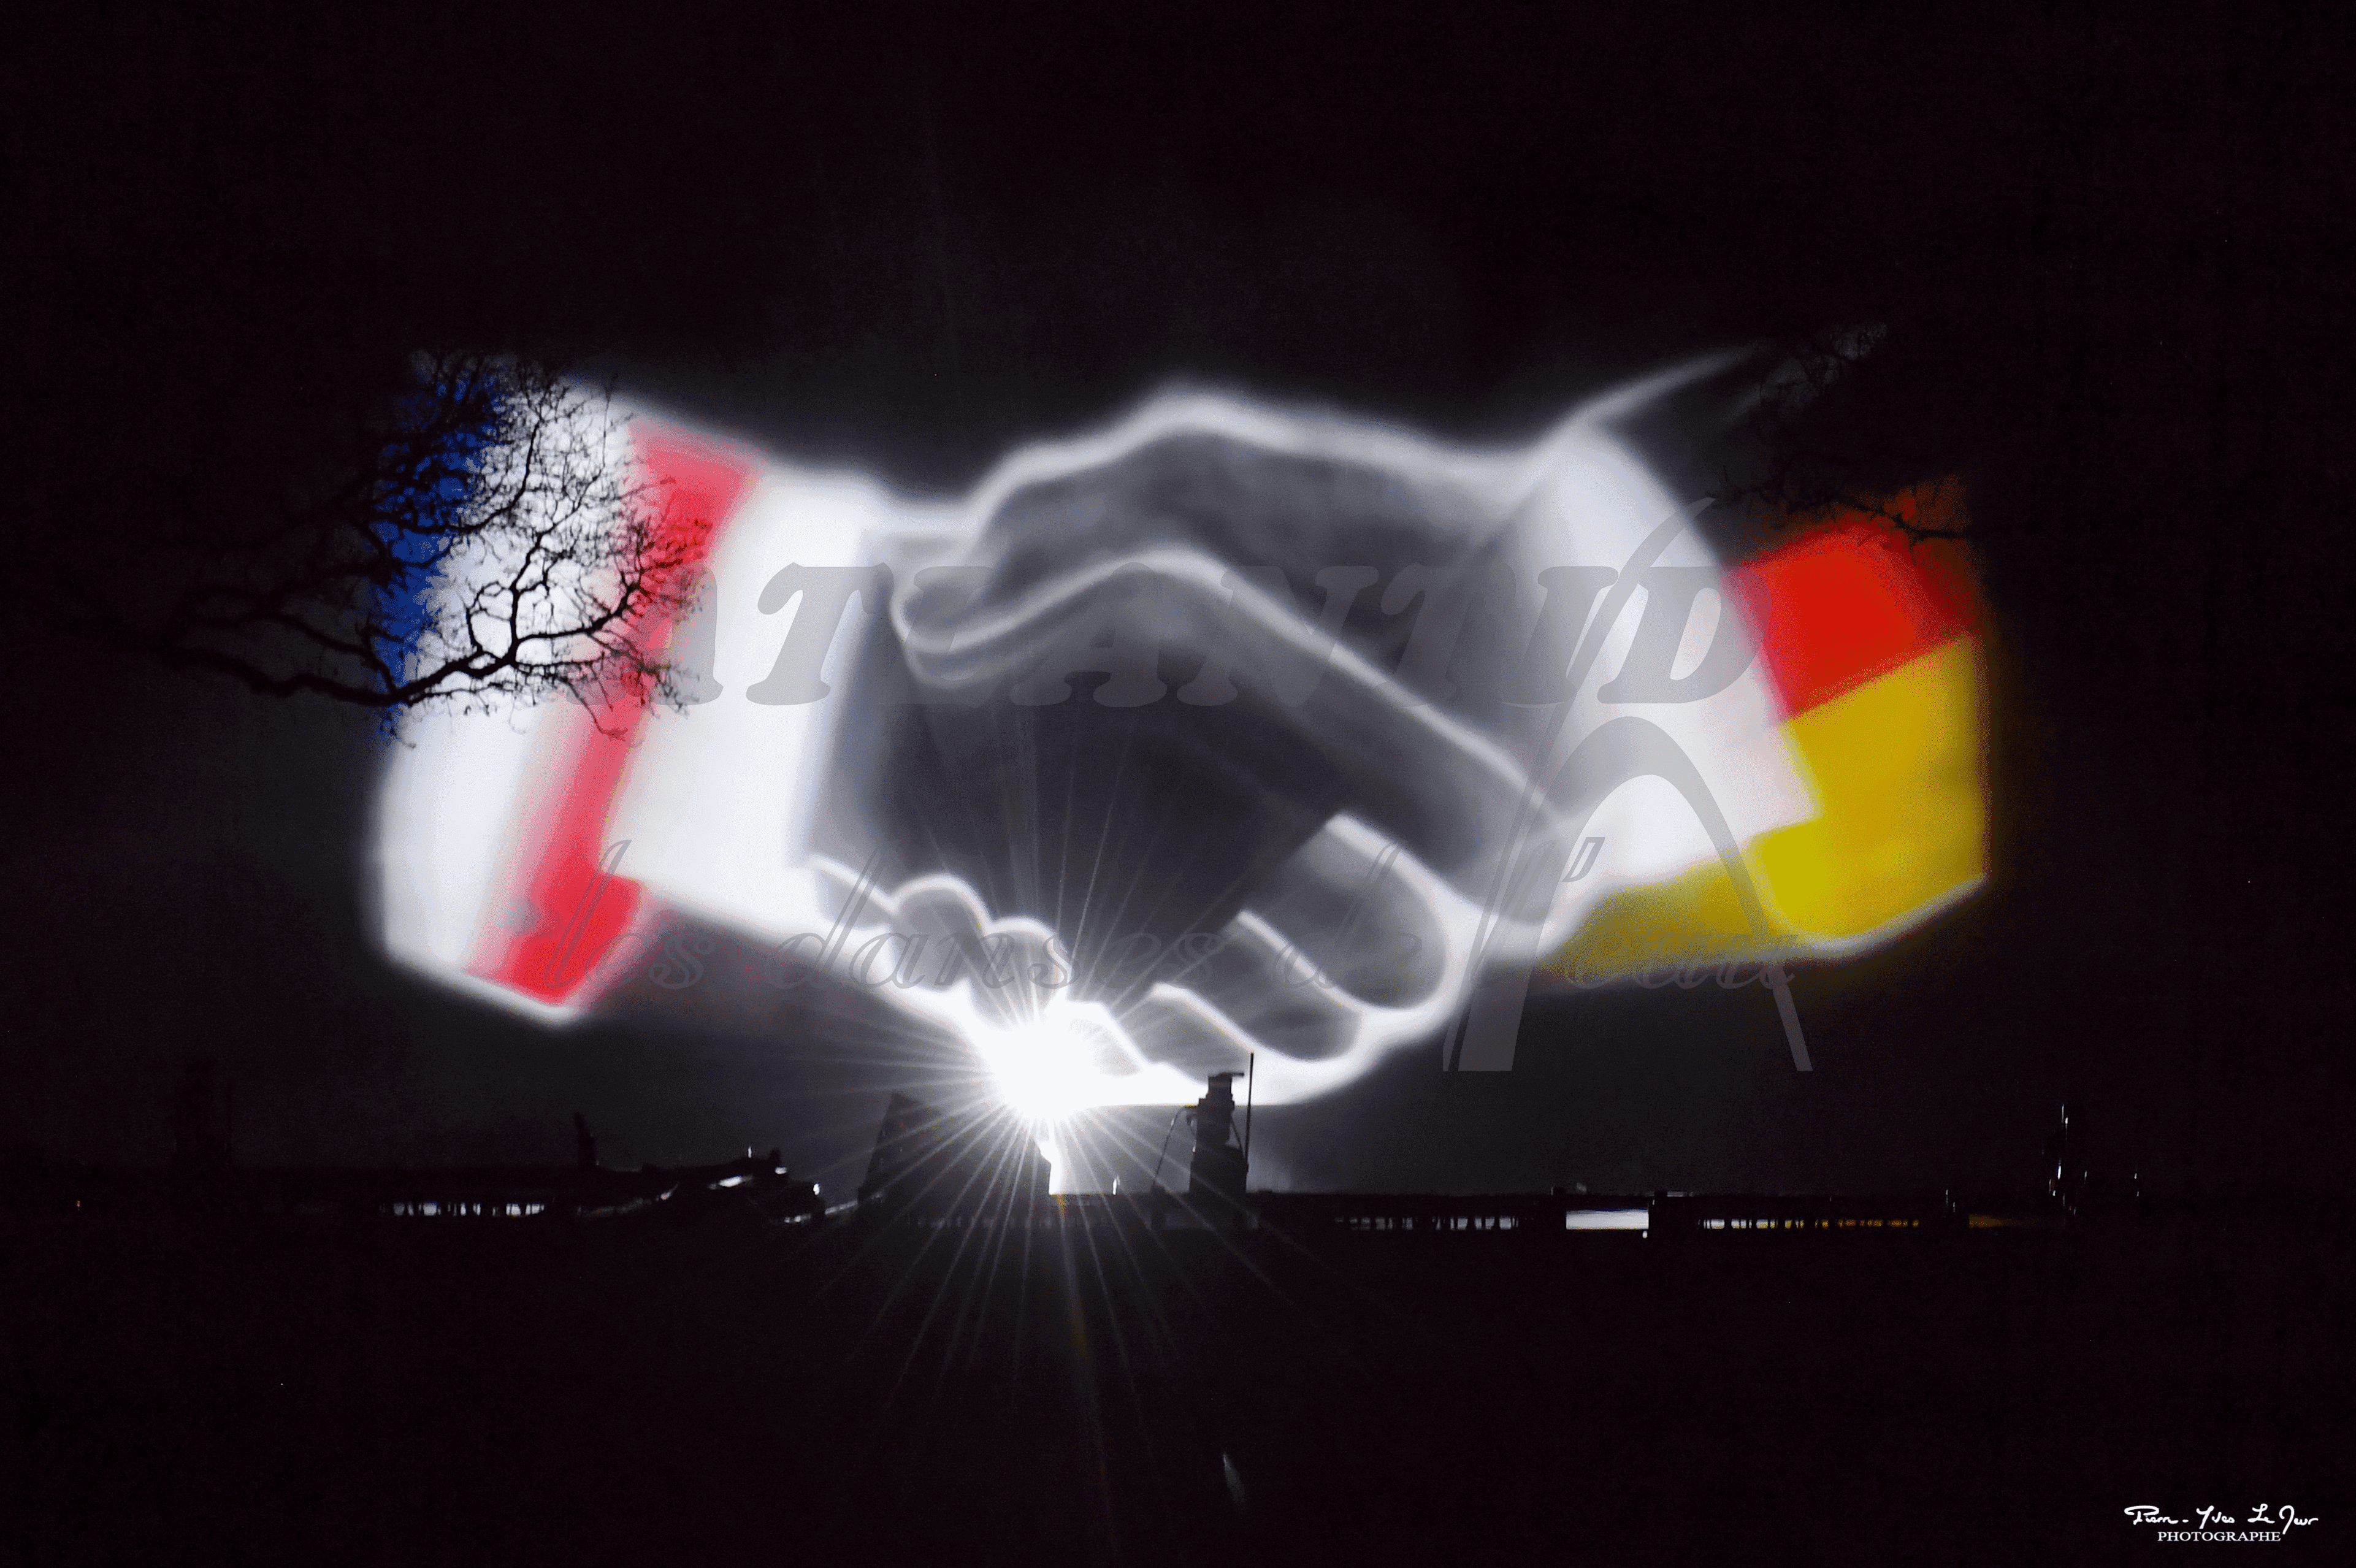 Atlantid - Projection of a French hand and a German hand shaking on water - Commemoration 1944